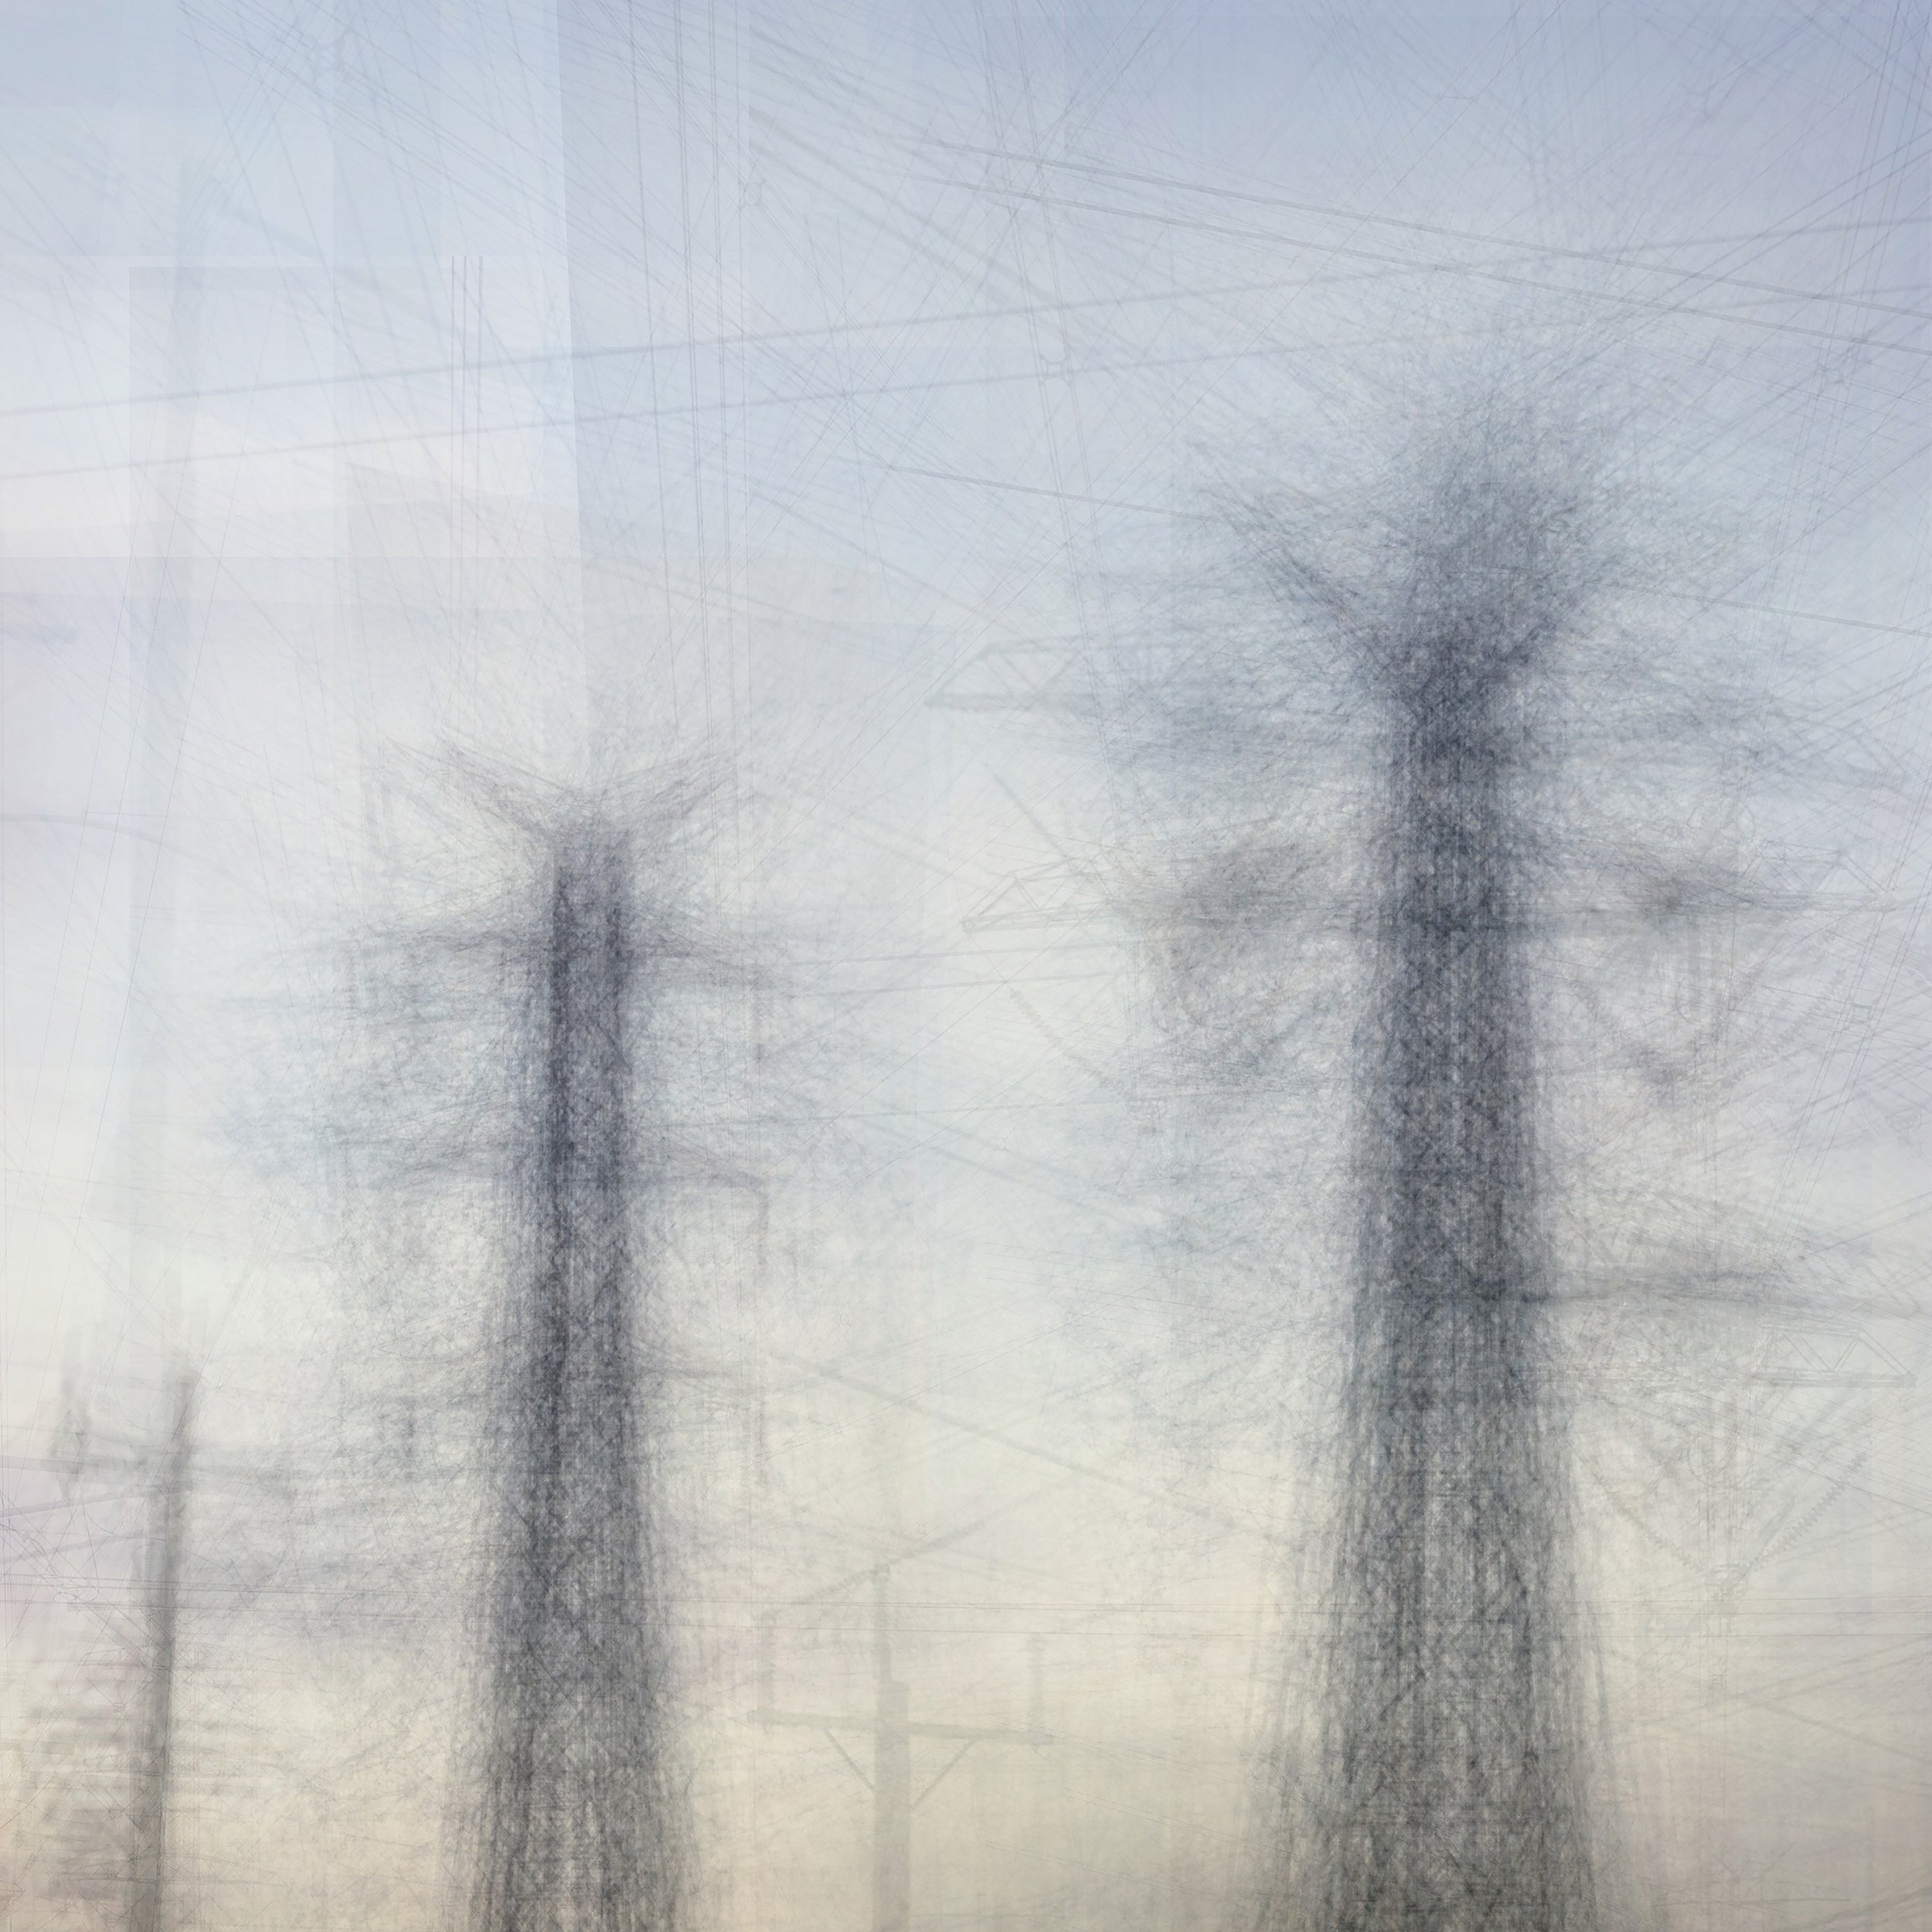   Tower   (print only), 2020, Archival pigment print, edition of 5 + 2 A/P, 1/5, 67.5 x 67.5 cm &amp; 90 x 90 cm 